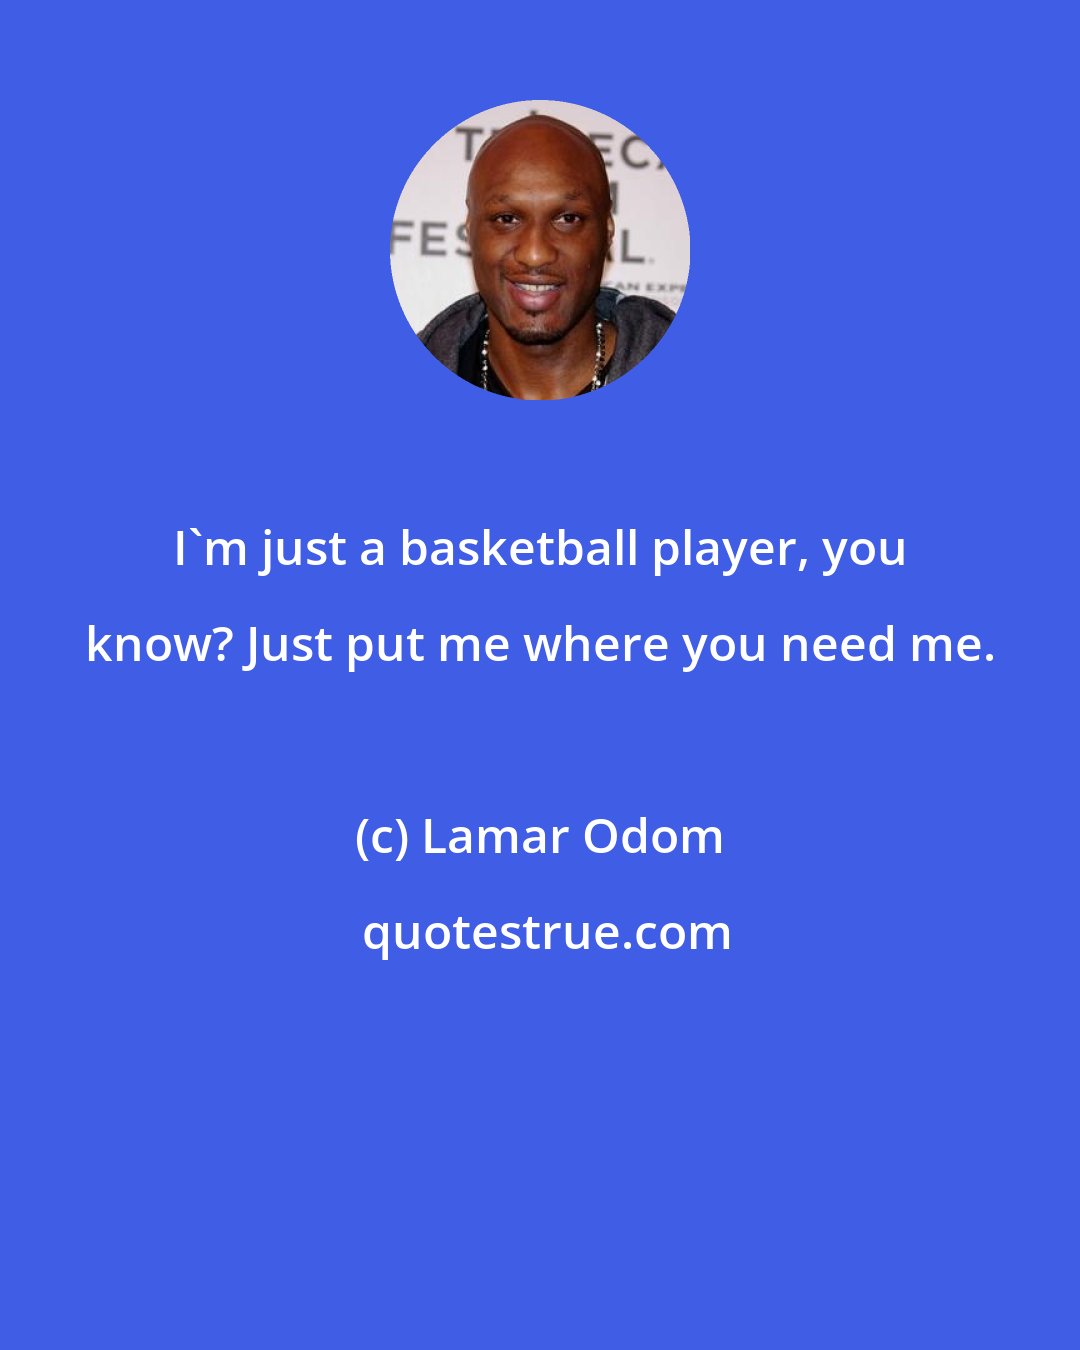 Lamar Odom: I'm just a basketball player, you know? Just put me where you need me.